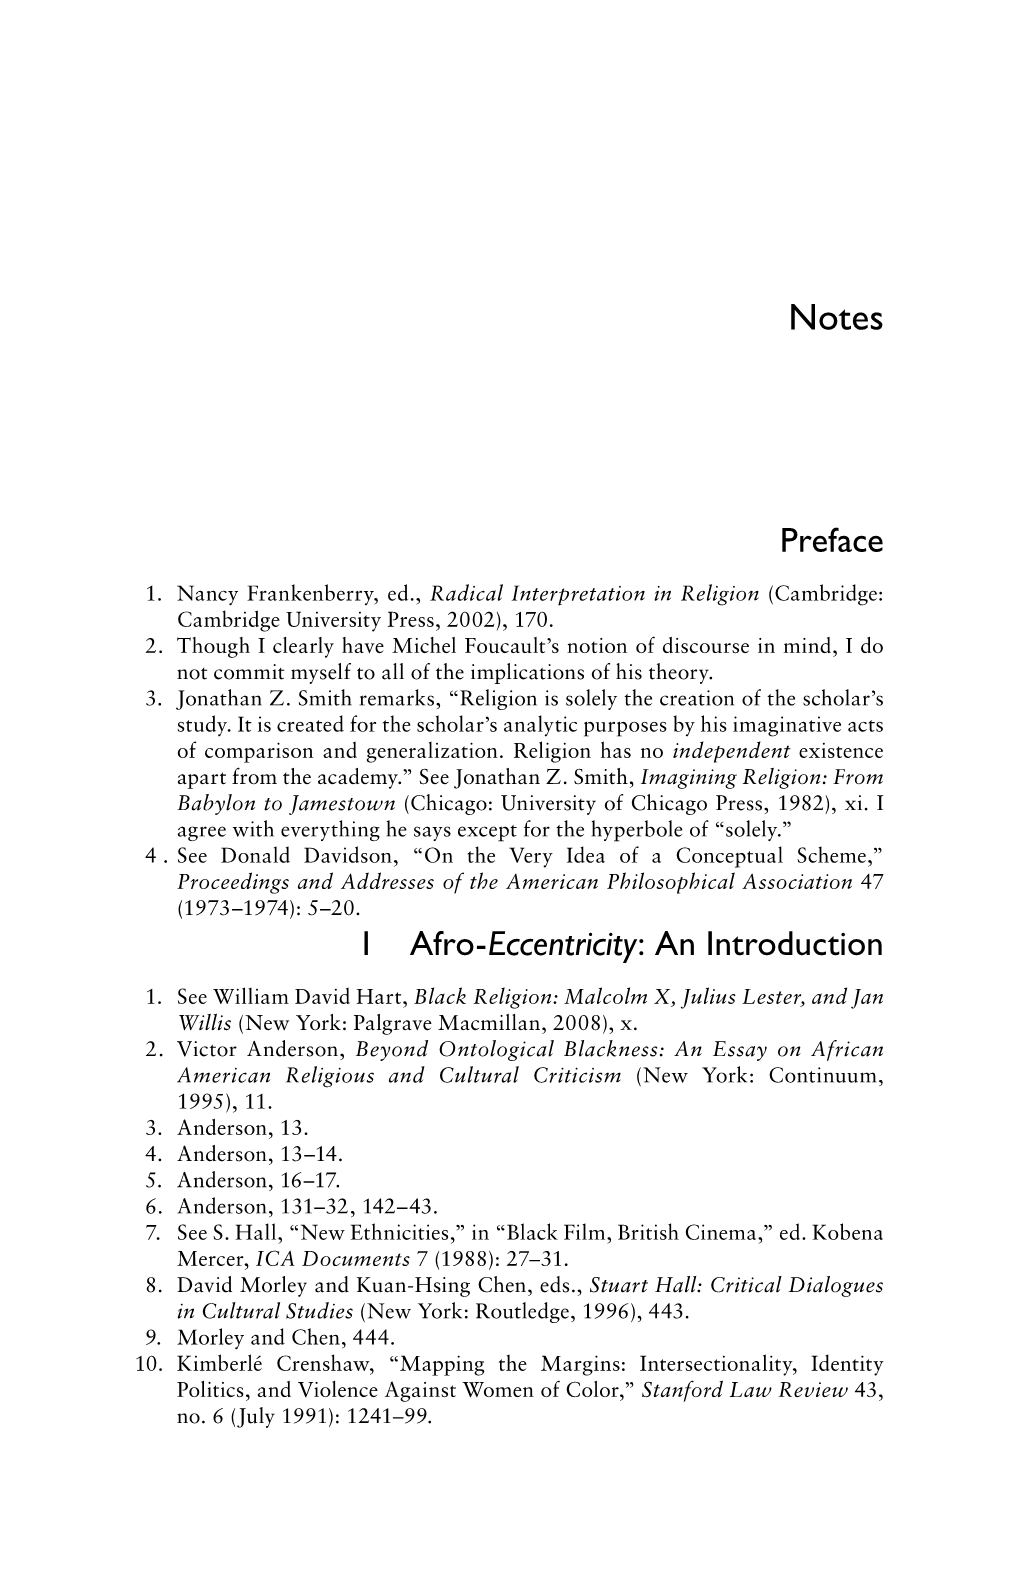 Preface 1 Afro- Eccentricity: an Introduction